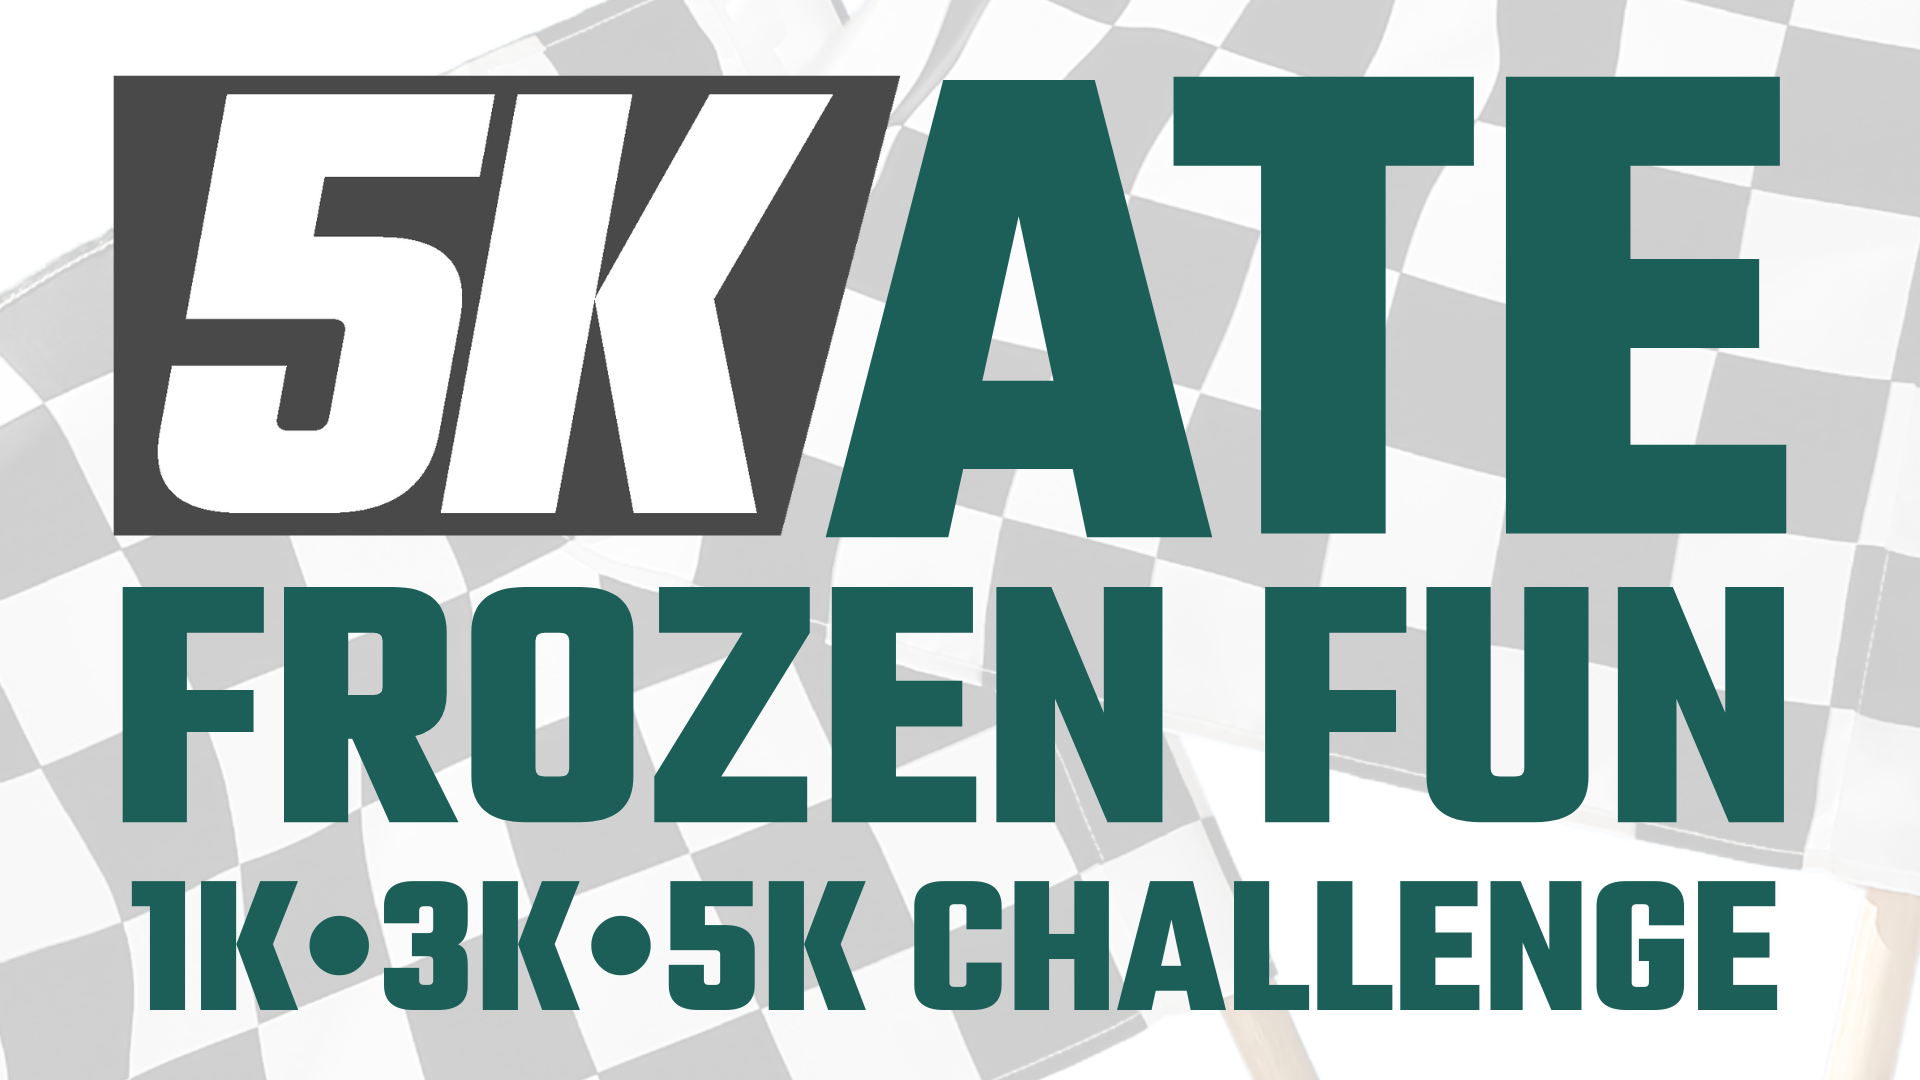 Frozen 5KATE 1K, 3K, 5K Fun Challenge. Stay cool in the summer heat while you skate laps to complete either a 1K, 3K or 5K challenge